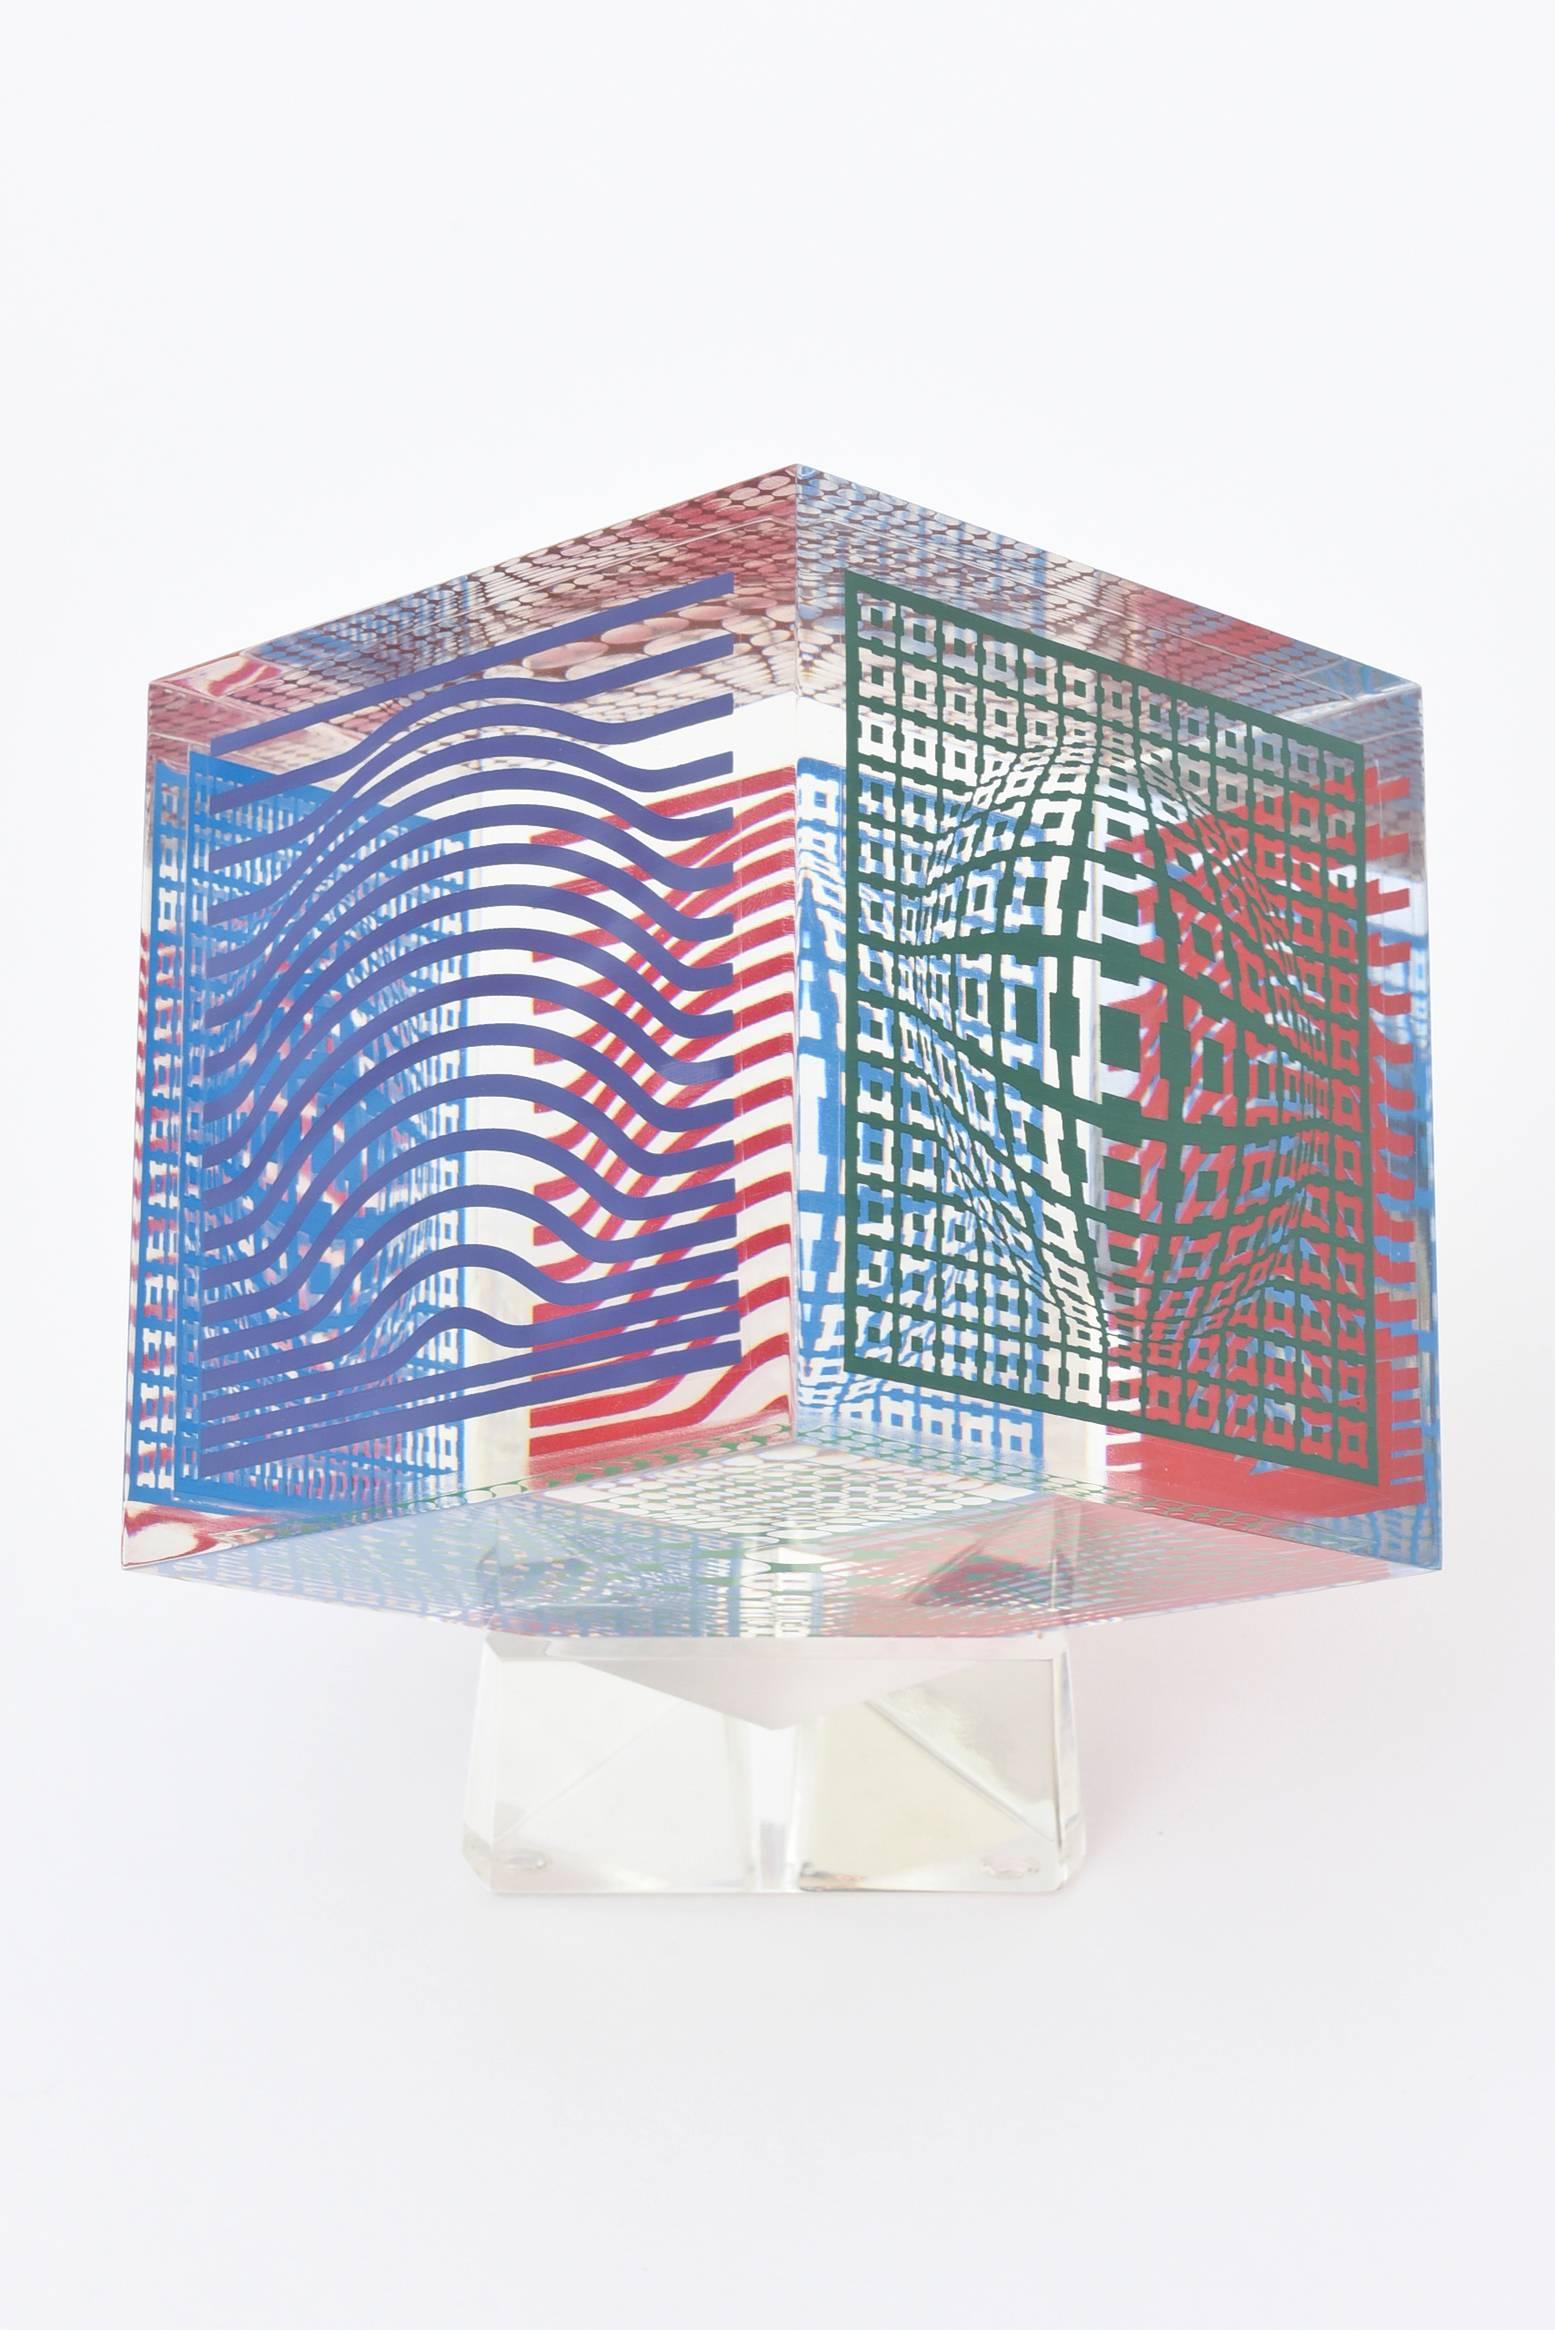 Victor Vasarely Acrylic and Silkscreen Graphic Cube Abstract Op Art Sculpture 2